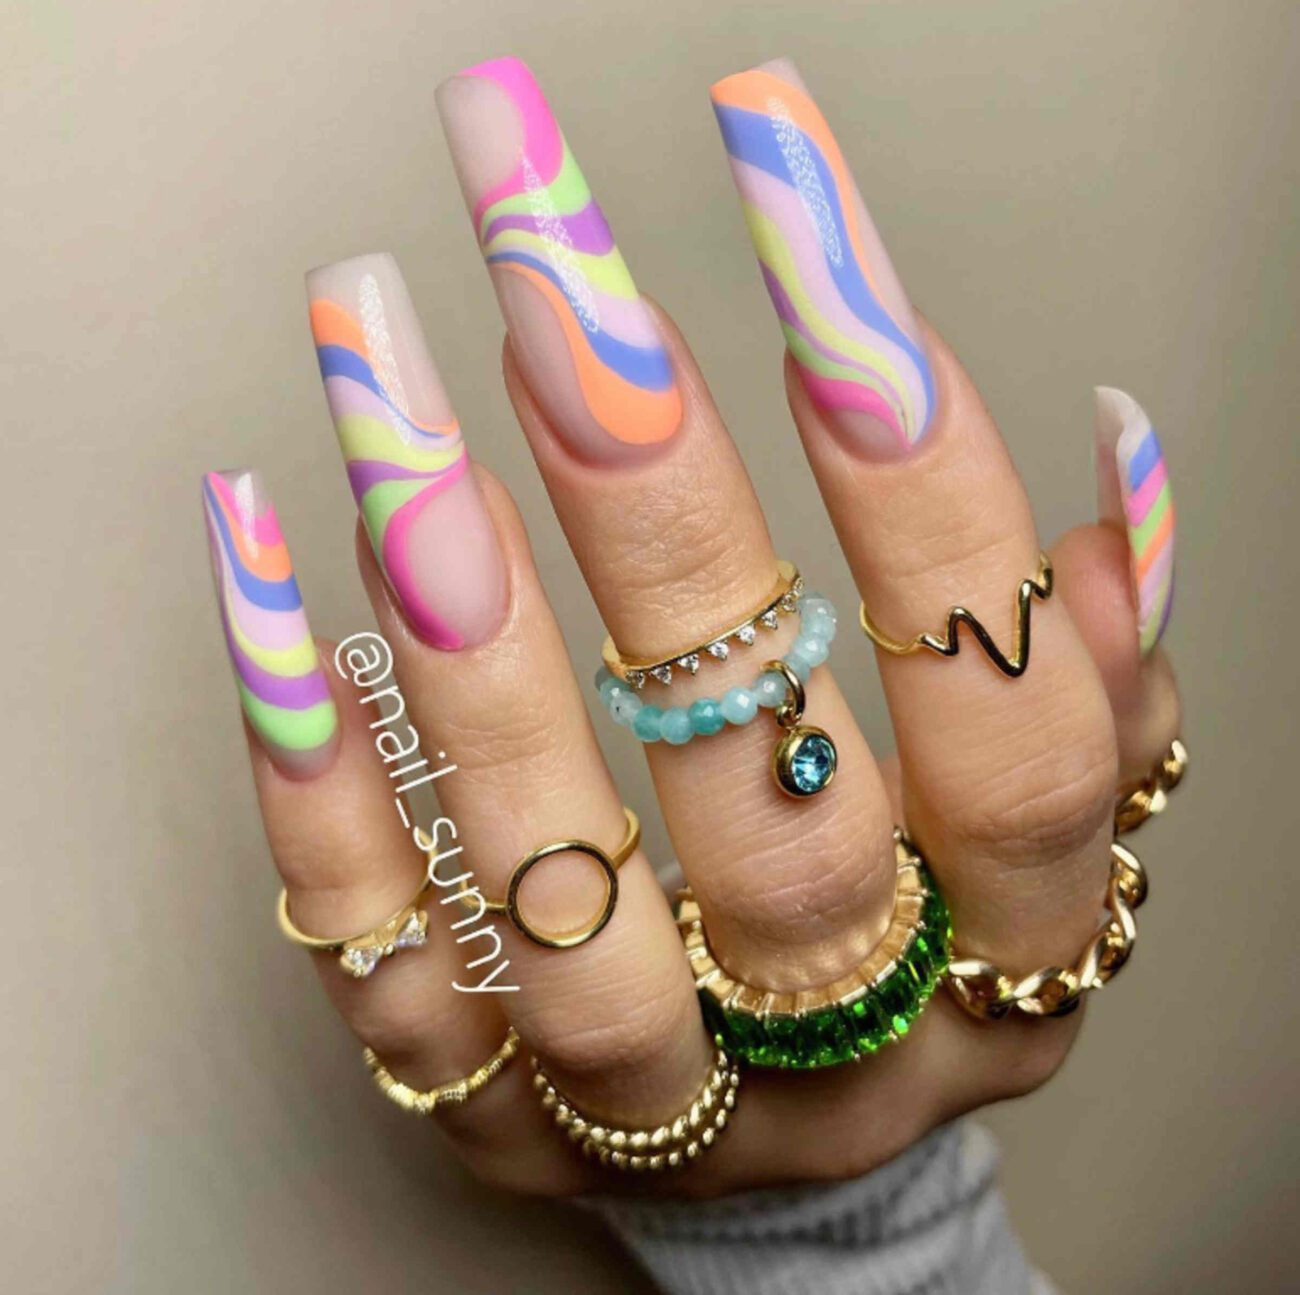 Get ready for the summer with coffin nails! From patterns to colors, use these design ideas to give your hands a new style to show off.